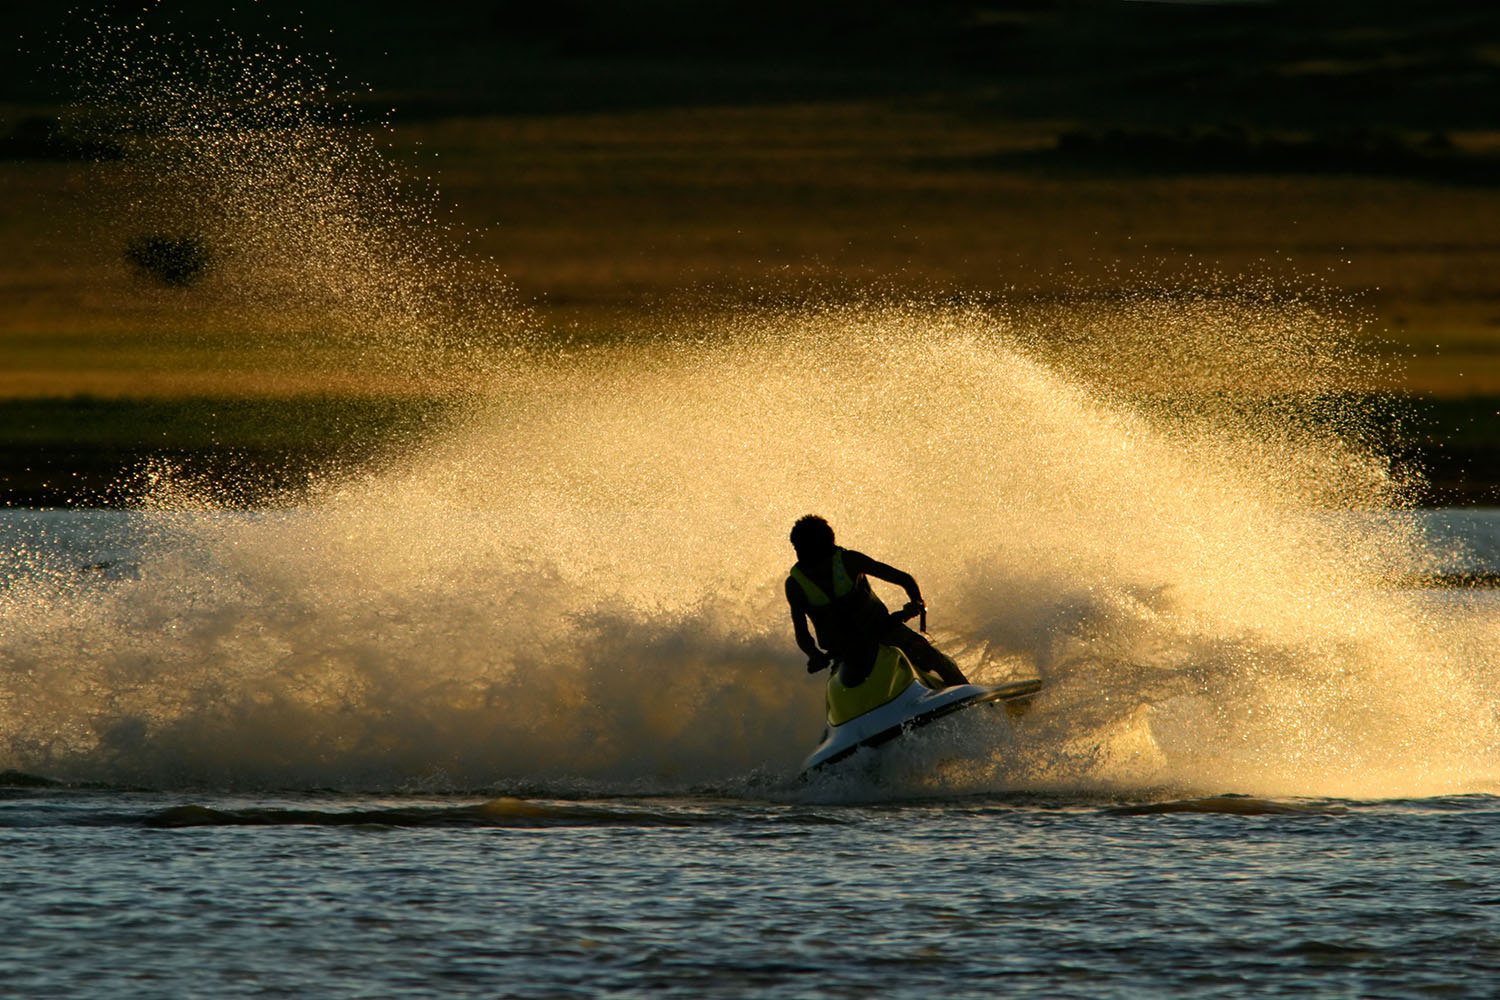 Wave Club Water Sports Rentals near Silver Lake Sand Dunes